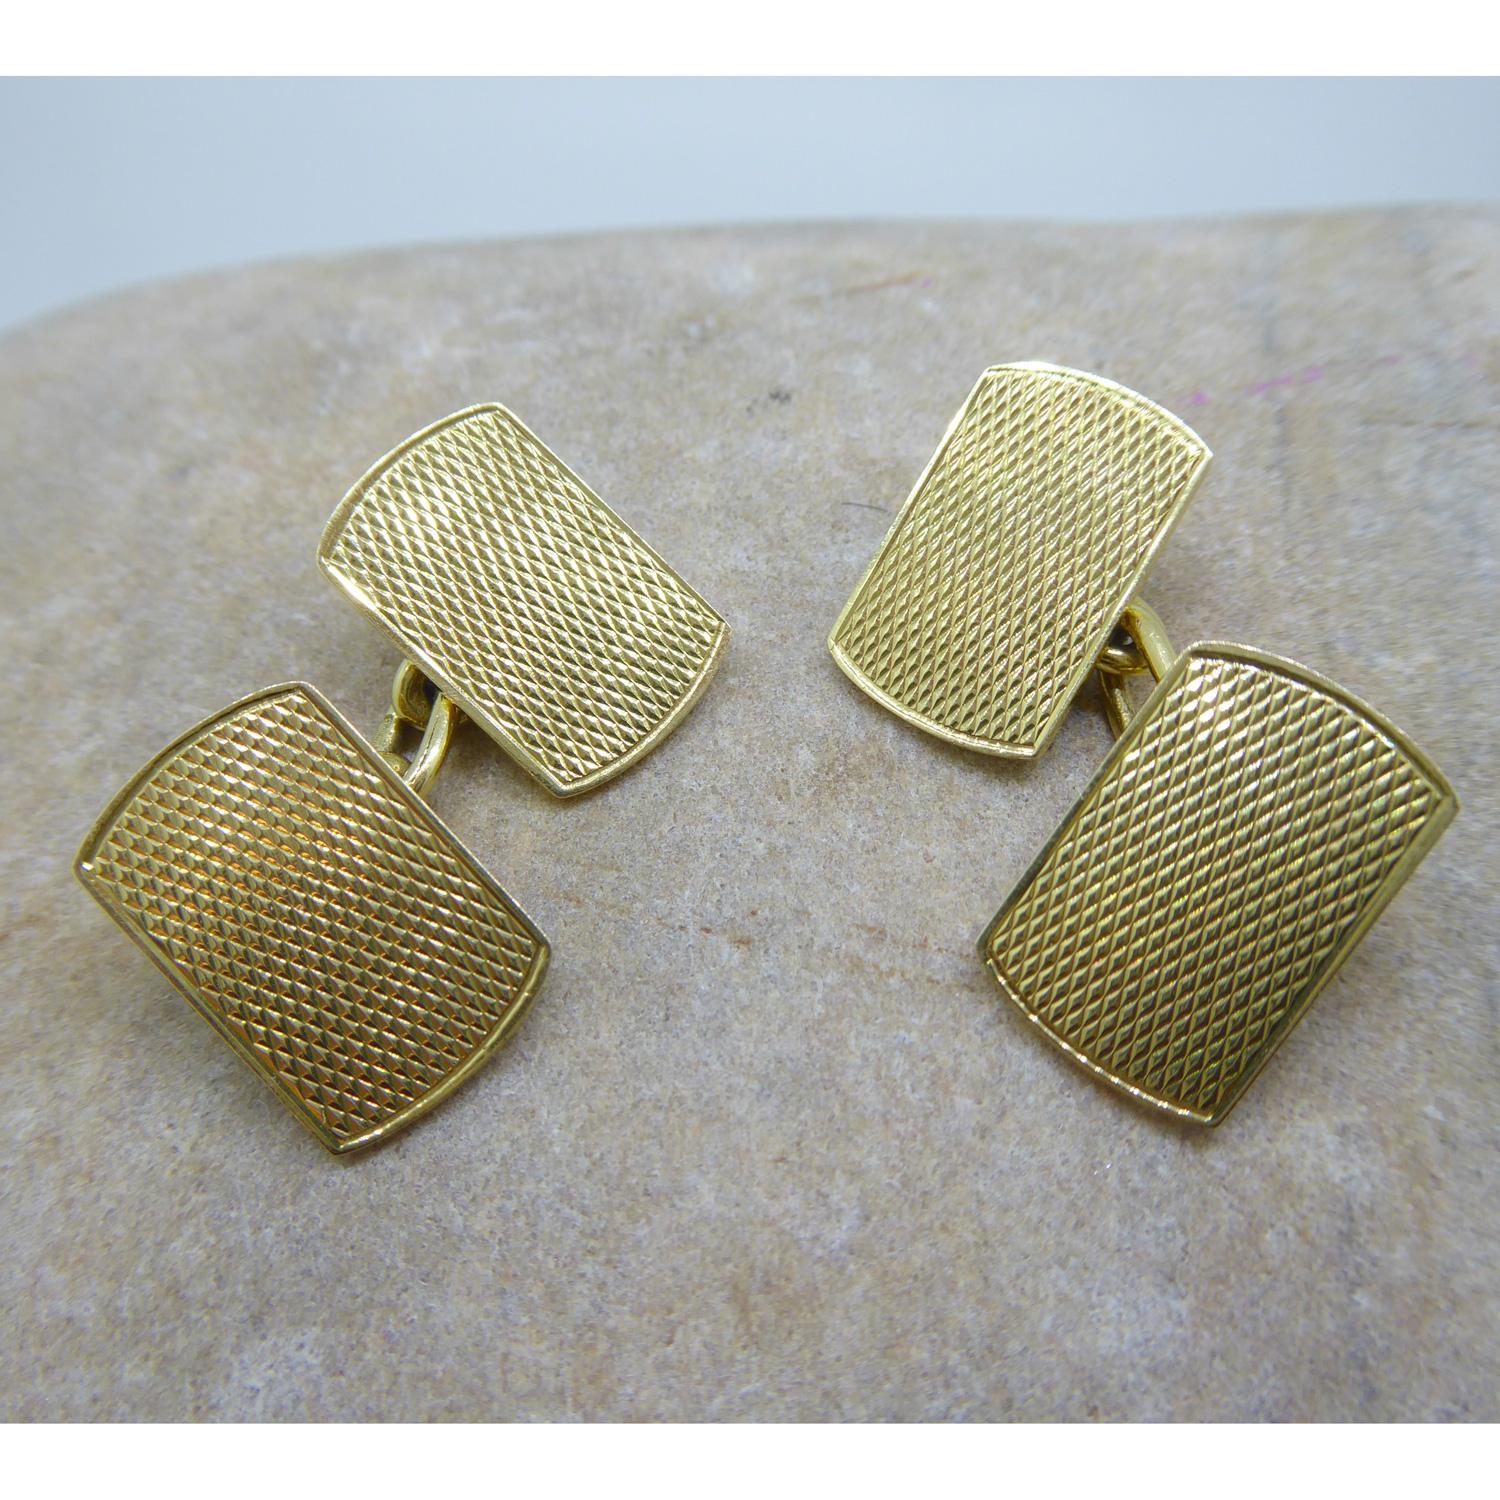 From the Art Deco era, a pair of 18ct yellow gold cufflinks hallmarked London 1931.  Machine engraved with diamond pattern within a reeded border, the cufflinks are overall rectangular shape with D shaped ends and are connected by oval link gold